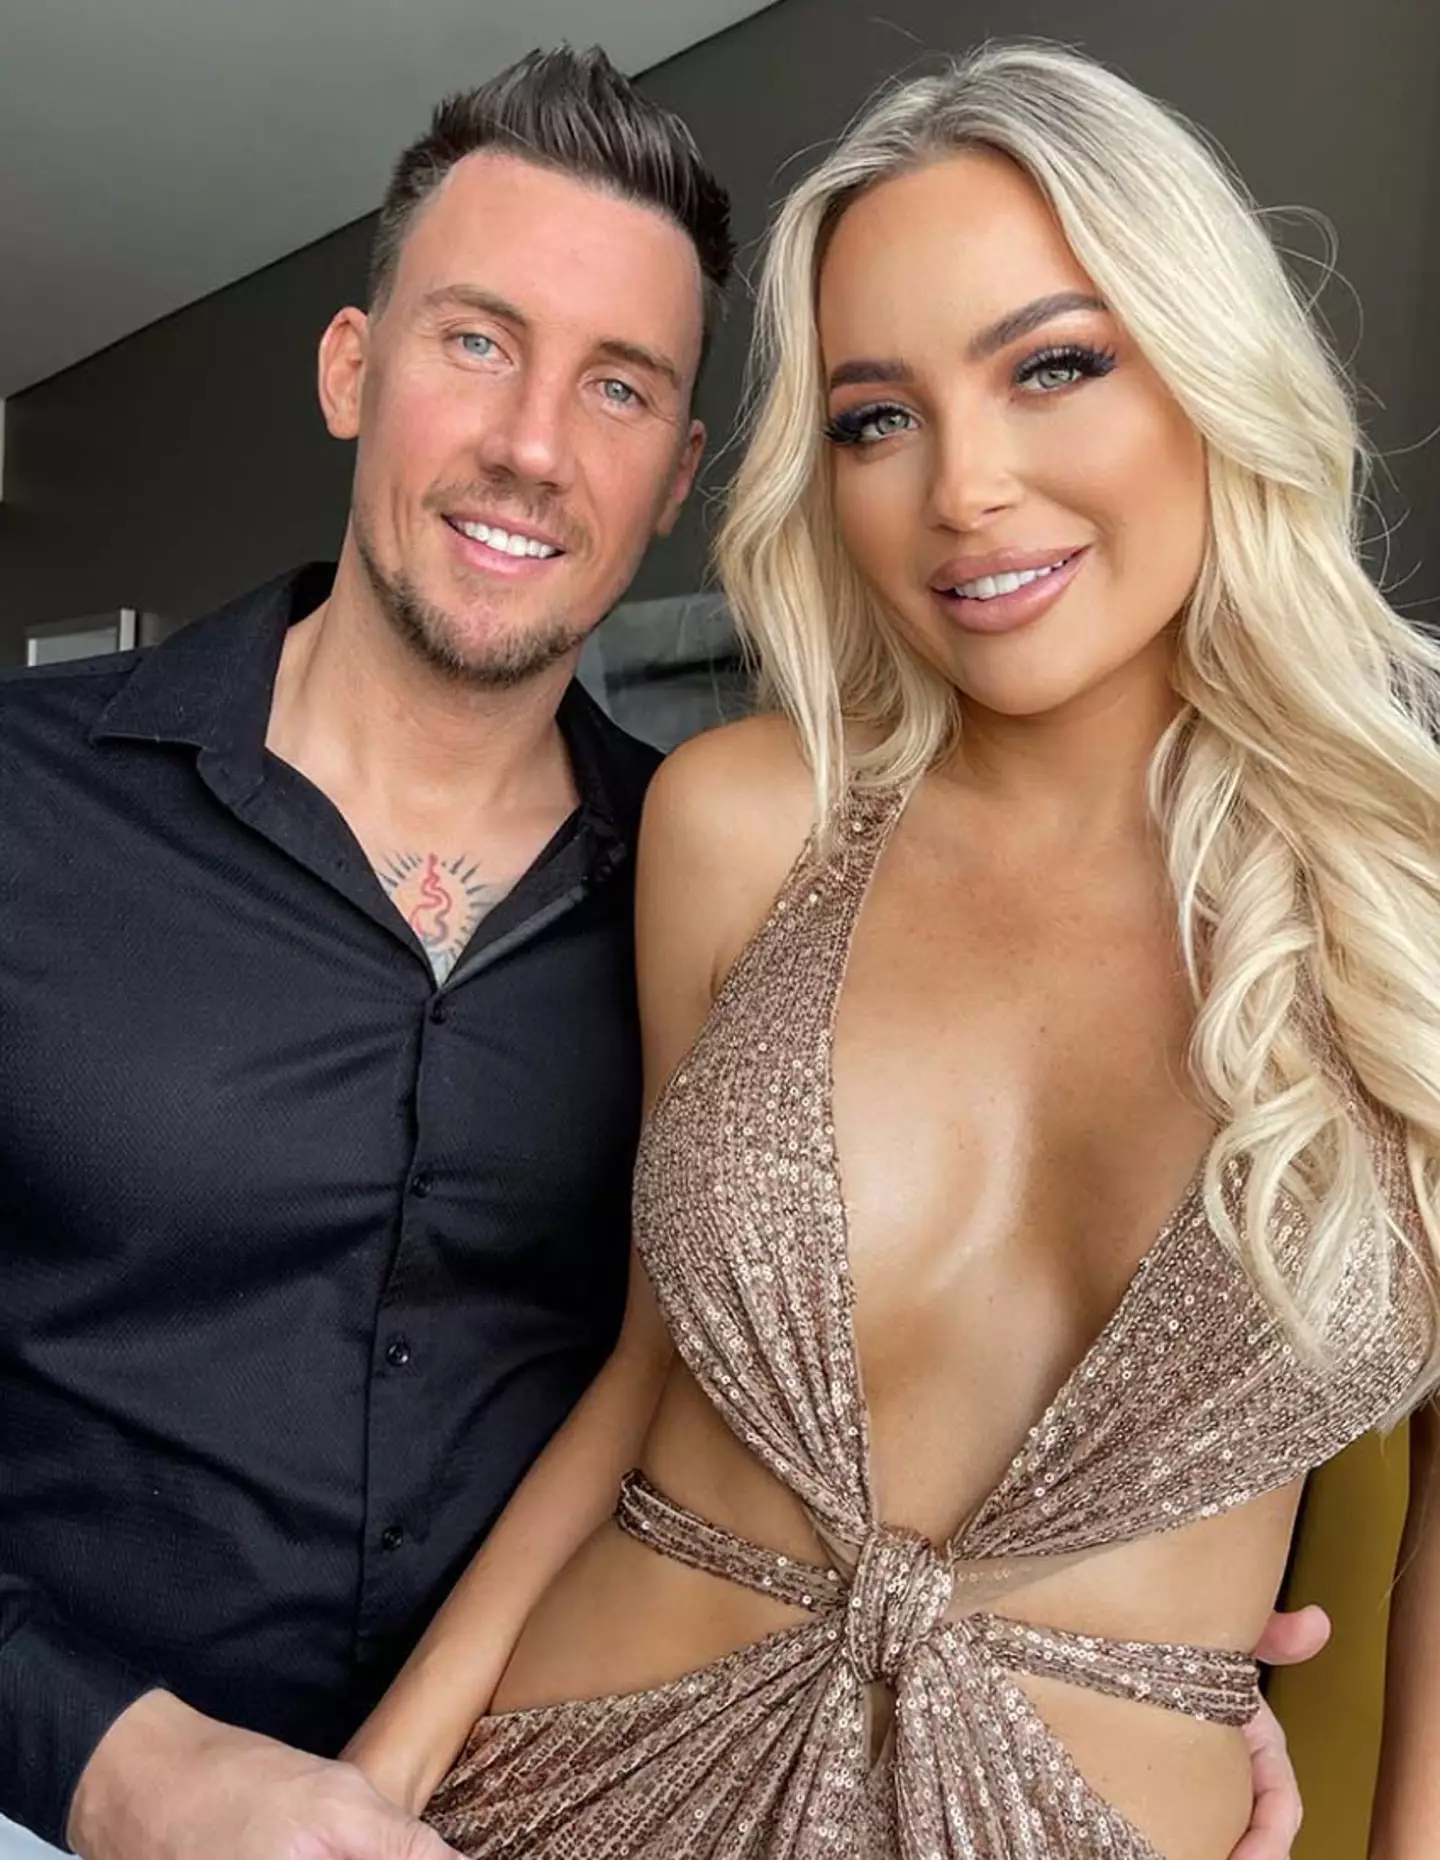 Married At First Sight Australia couple Layton and Melinda have called it quits.